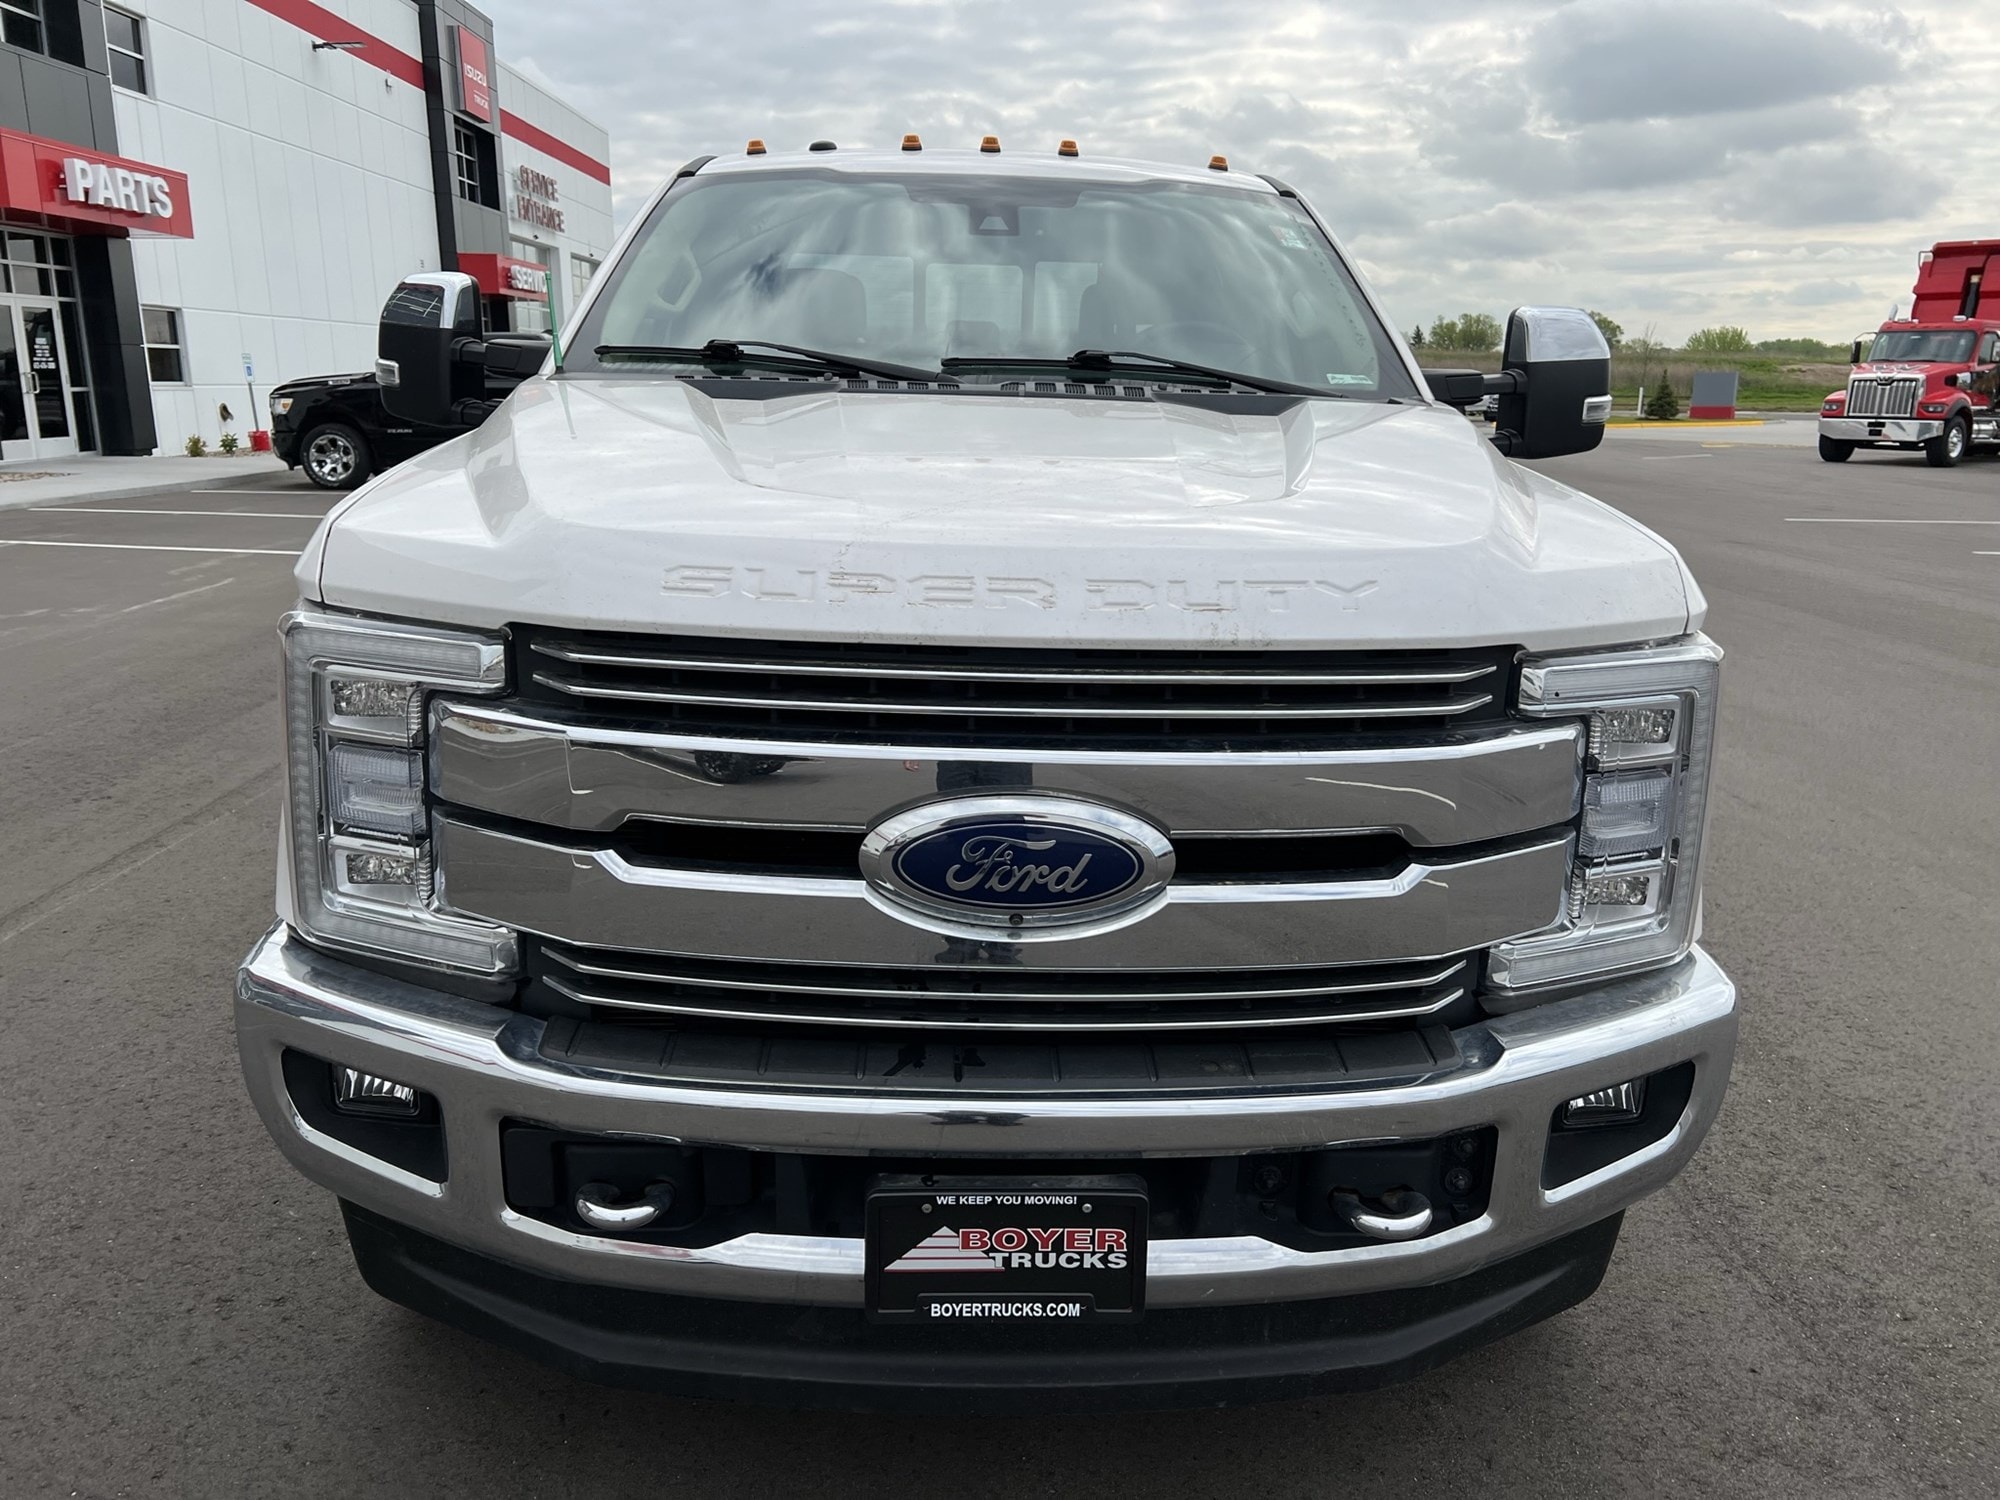 Used 2018 Ford F-350 Super Duty Lariat with VIN 1FT8W3BT1JEC79442 for sale in Minneapolis, Minnesota